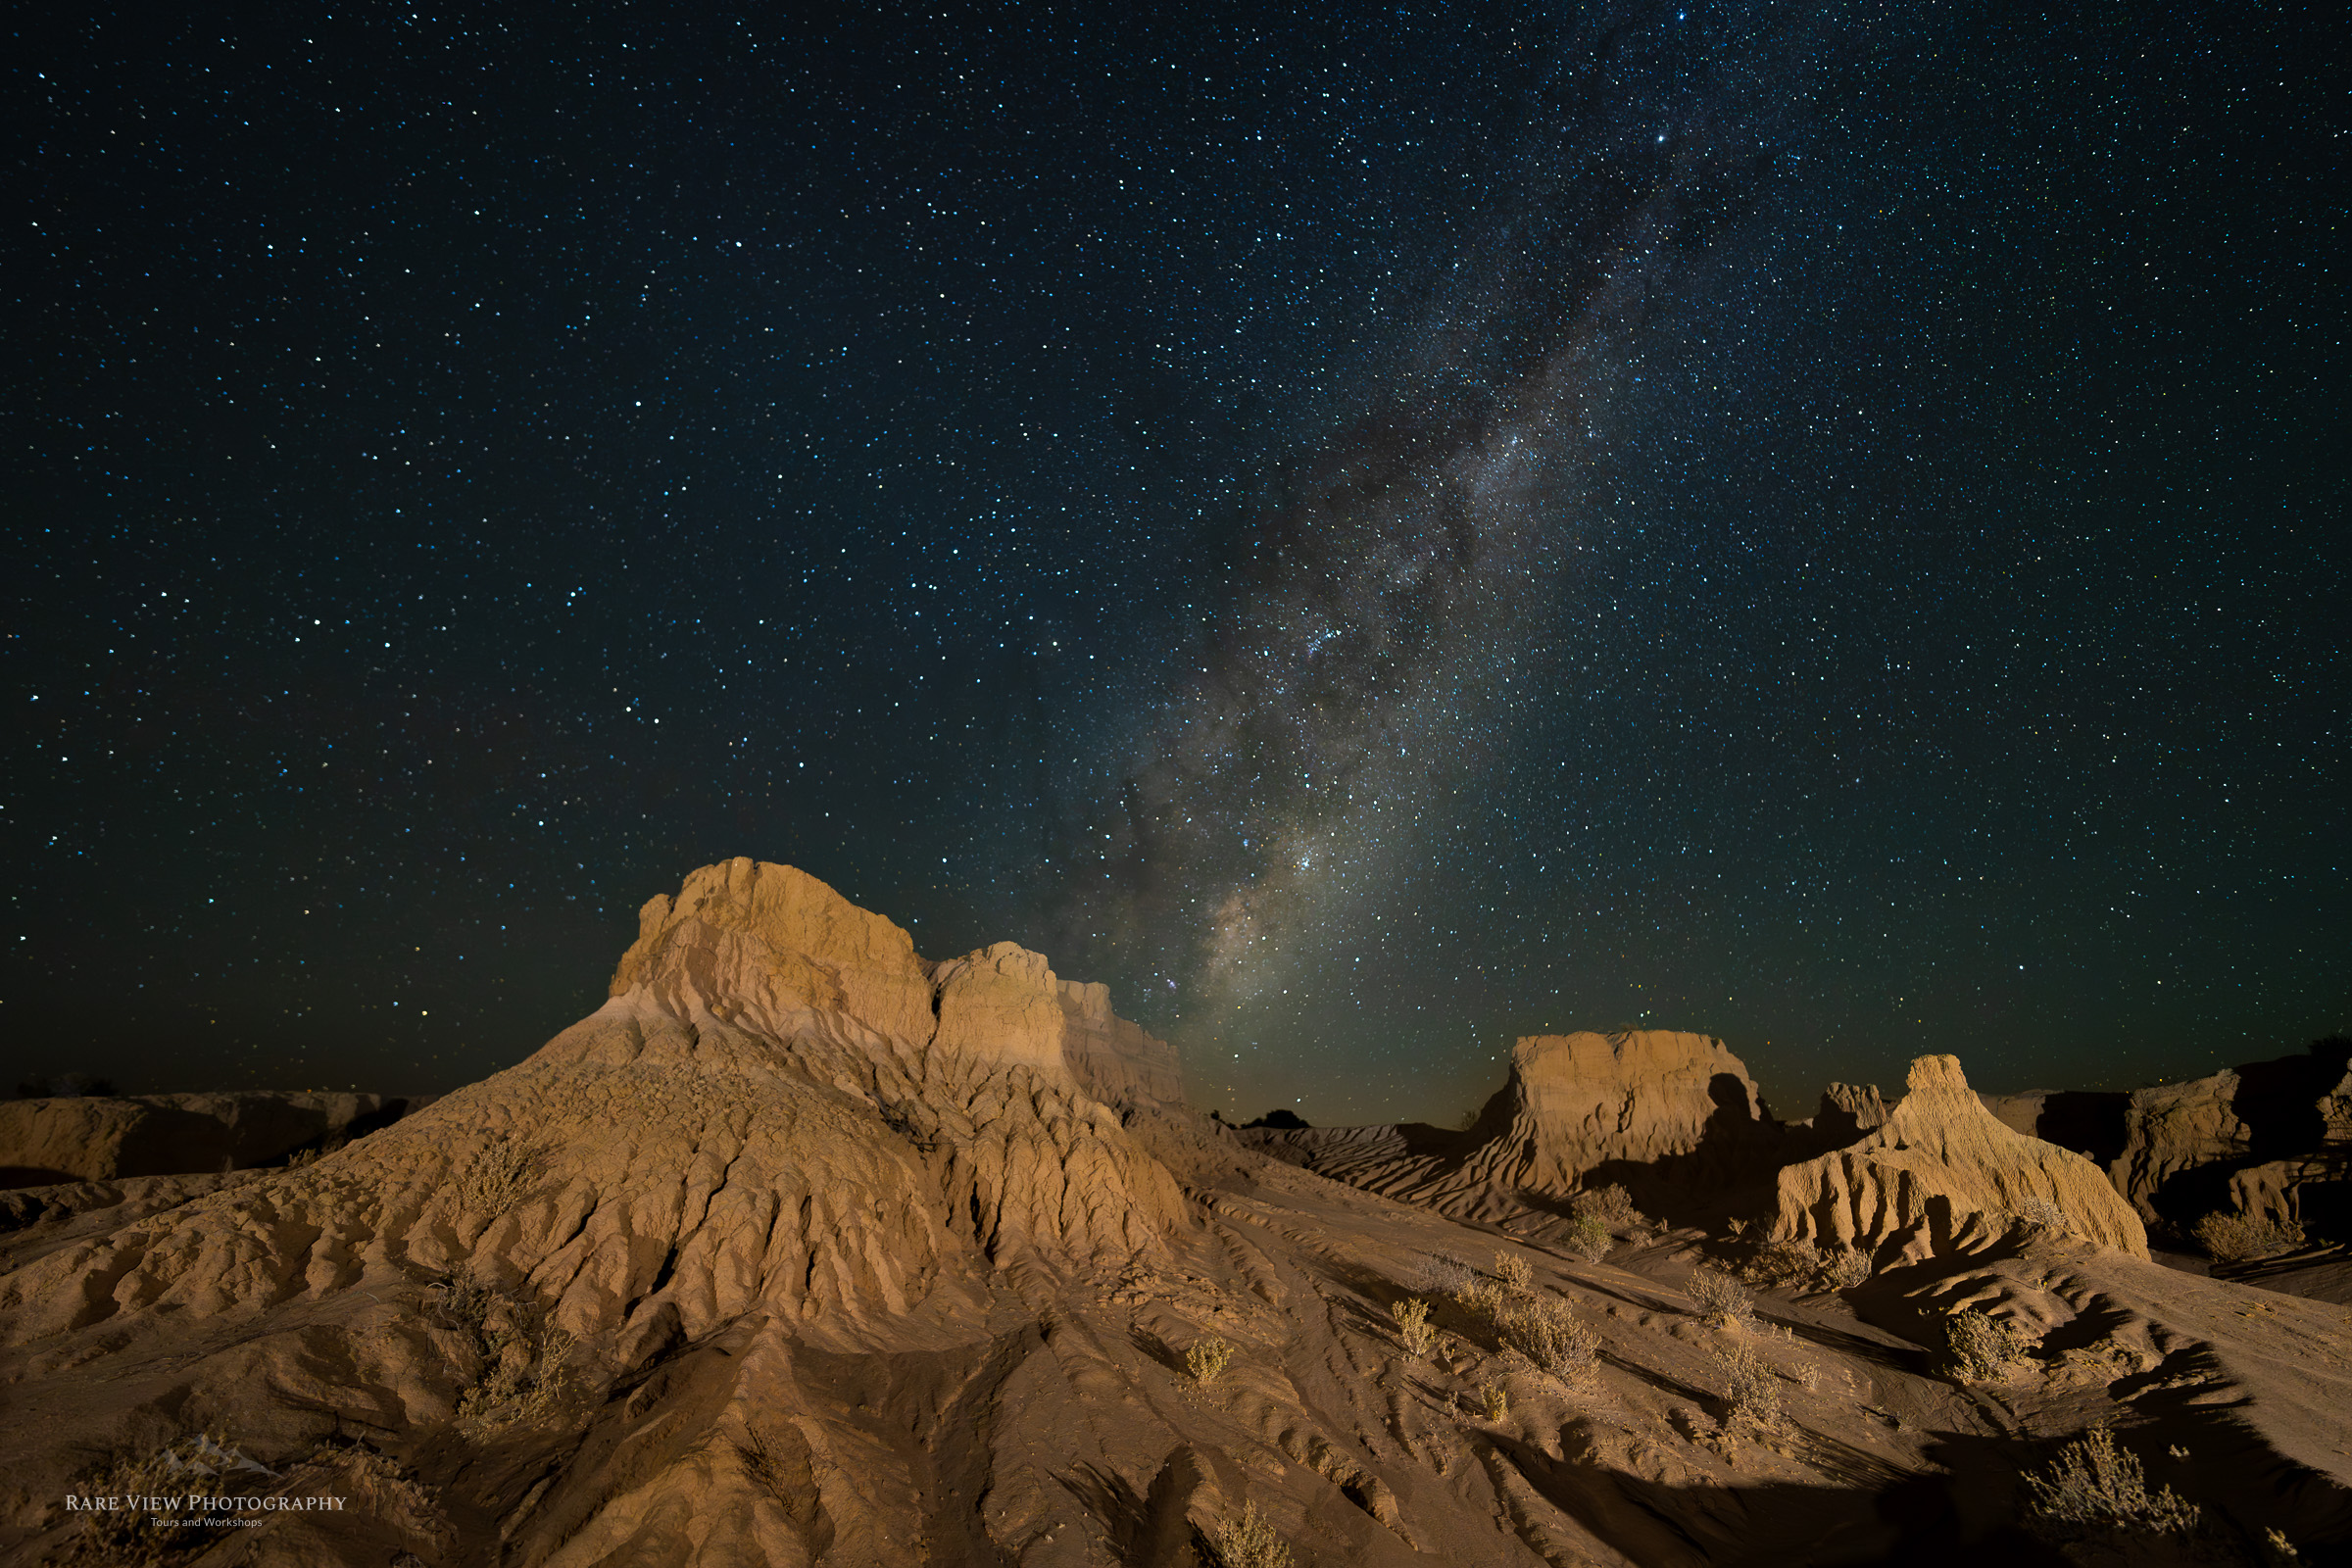 Night Sky image of Mungo National Park and Milky Way